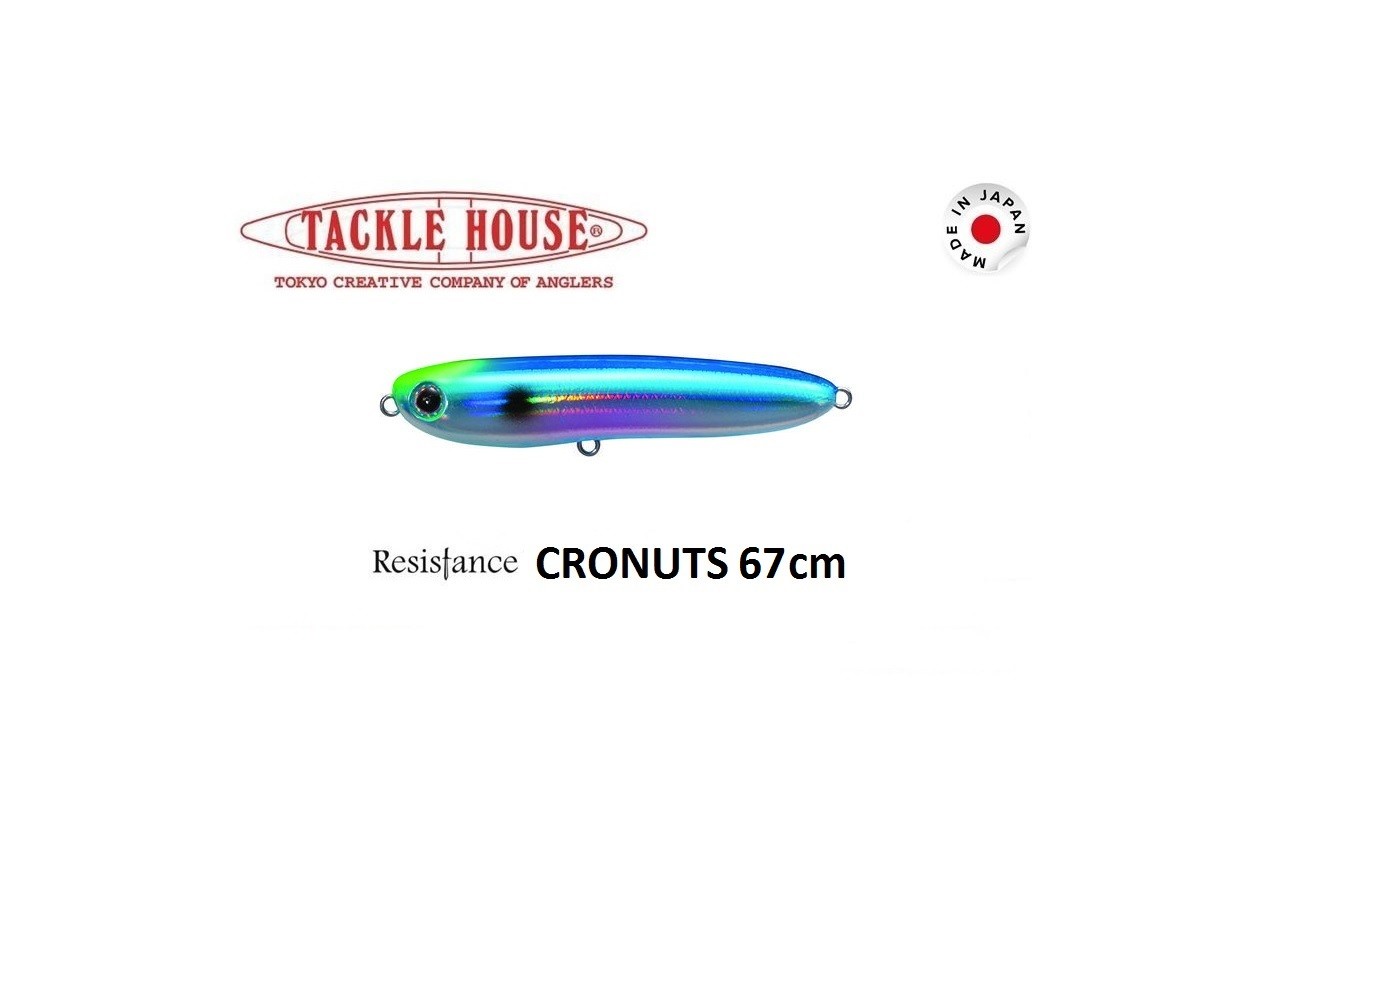 TACKLE HOUSE RESISTANCE CRONUTS 67